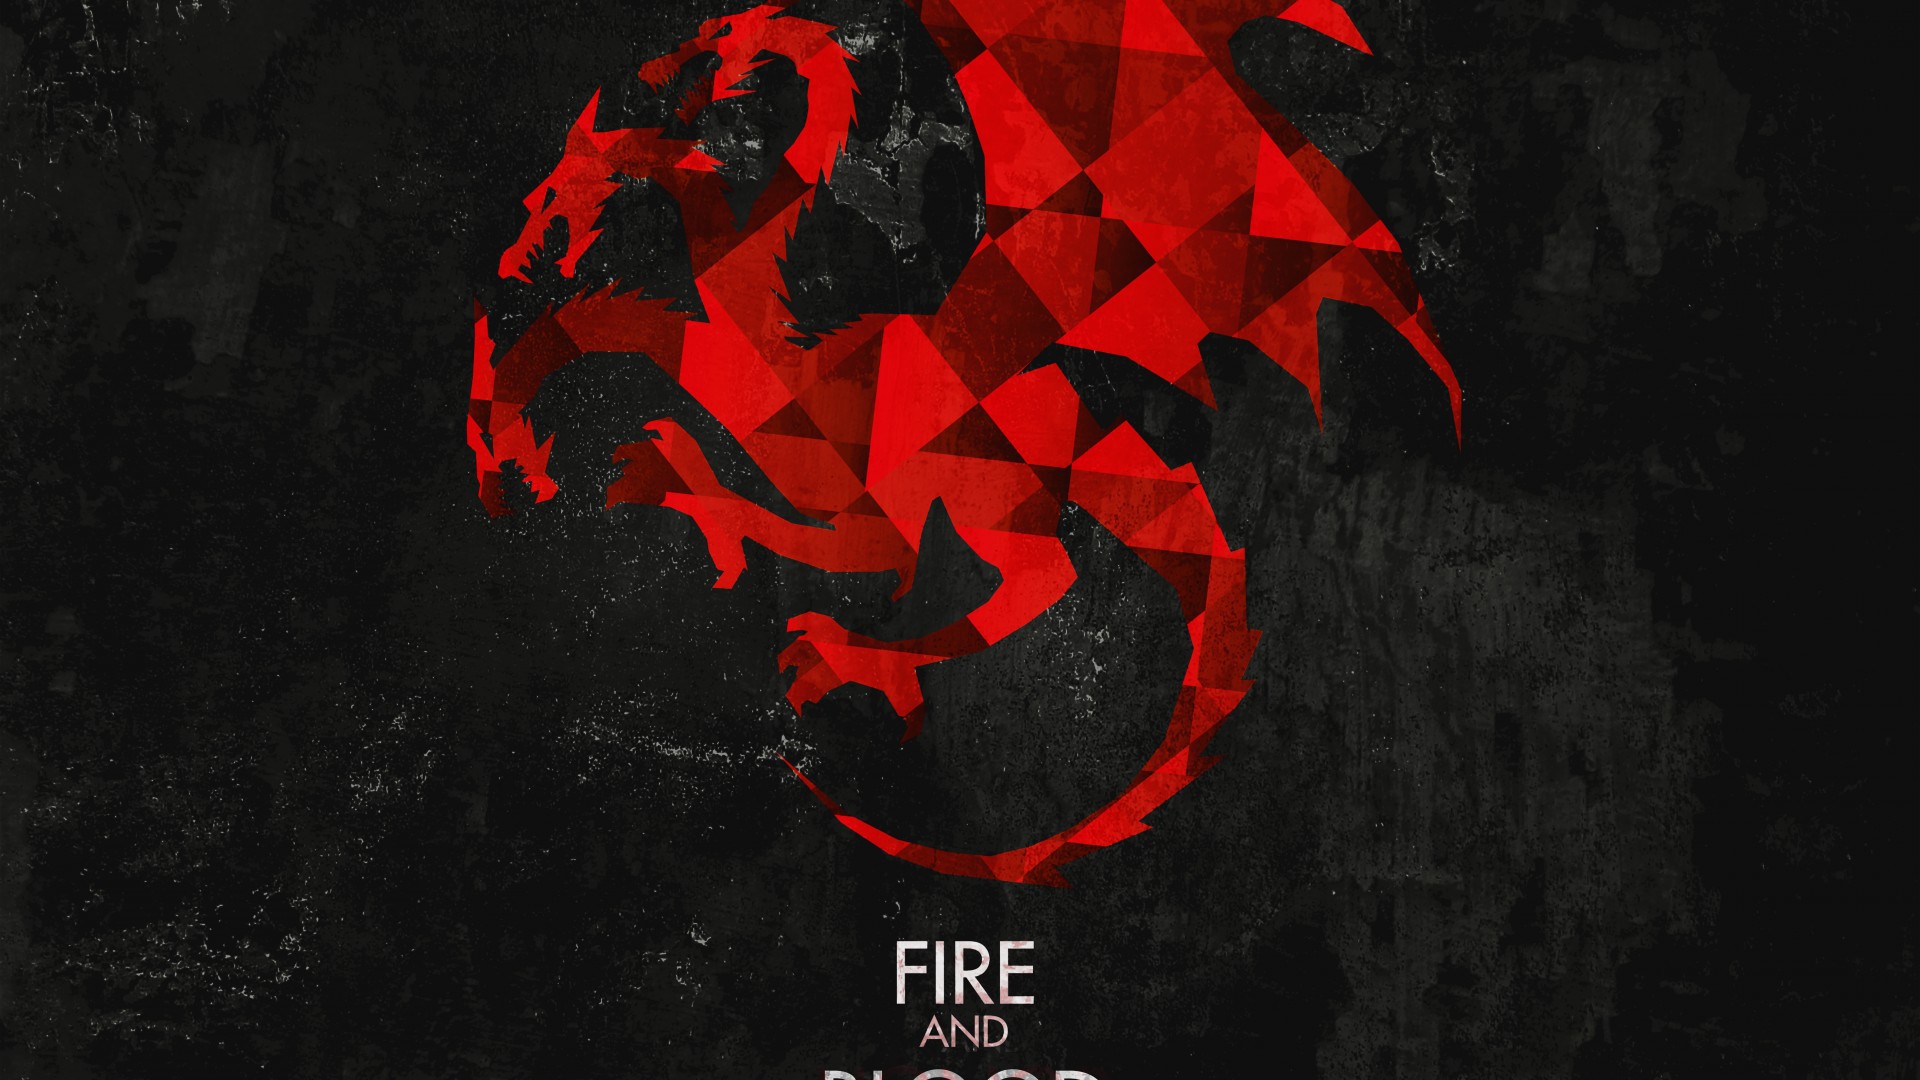 Red Dragon Wallpaper And Image Pictures Photos